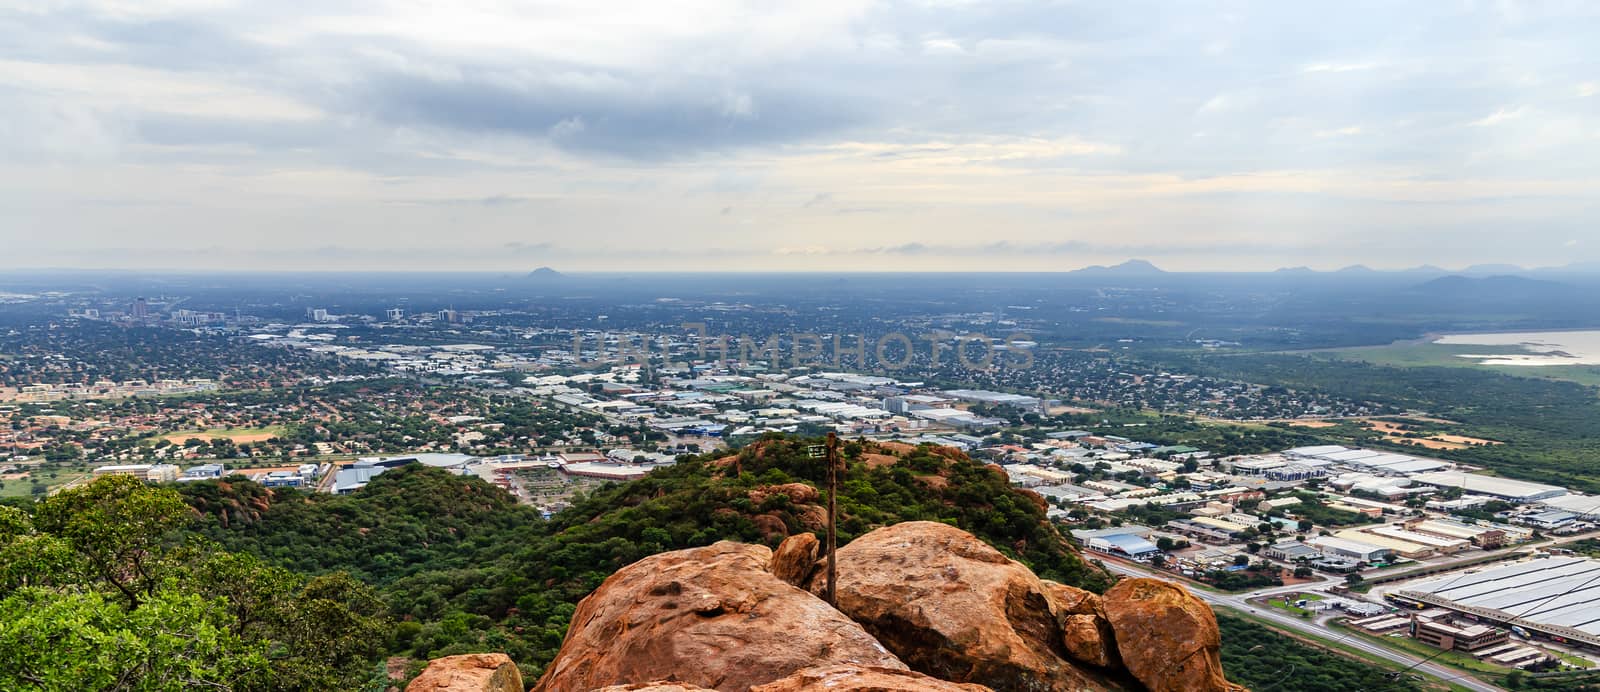 Aerial view of rapidly sprawling Gaborone city spread out over t by ambeon